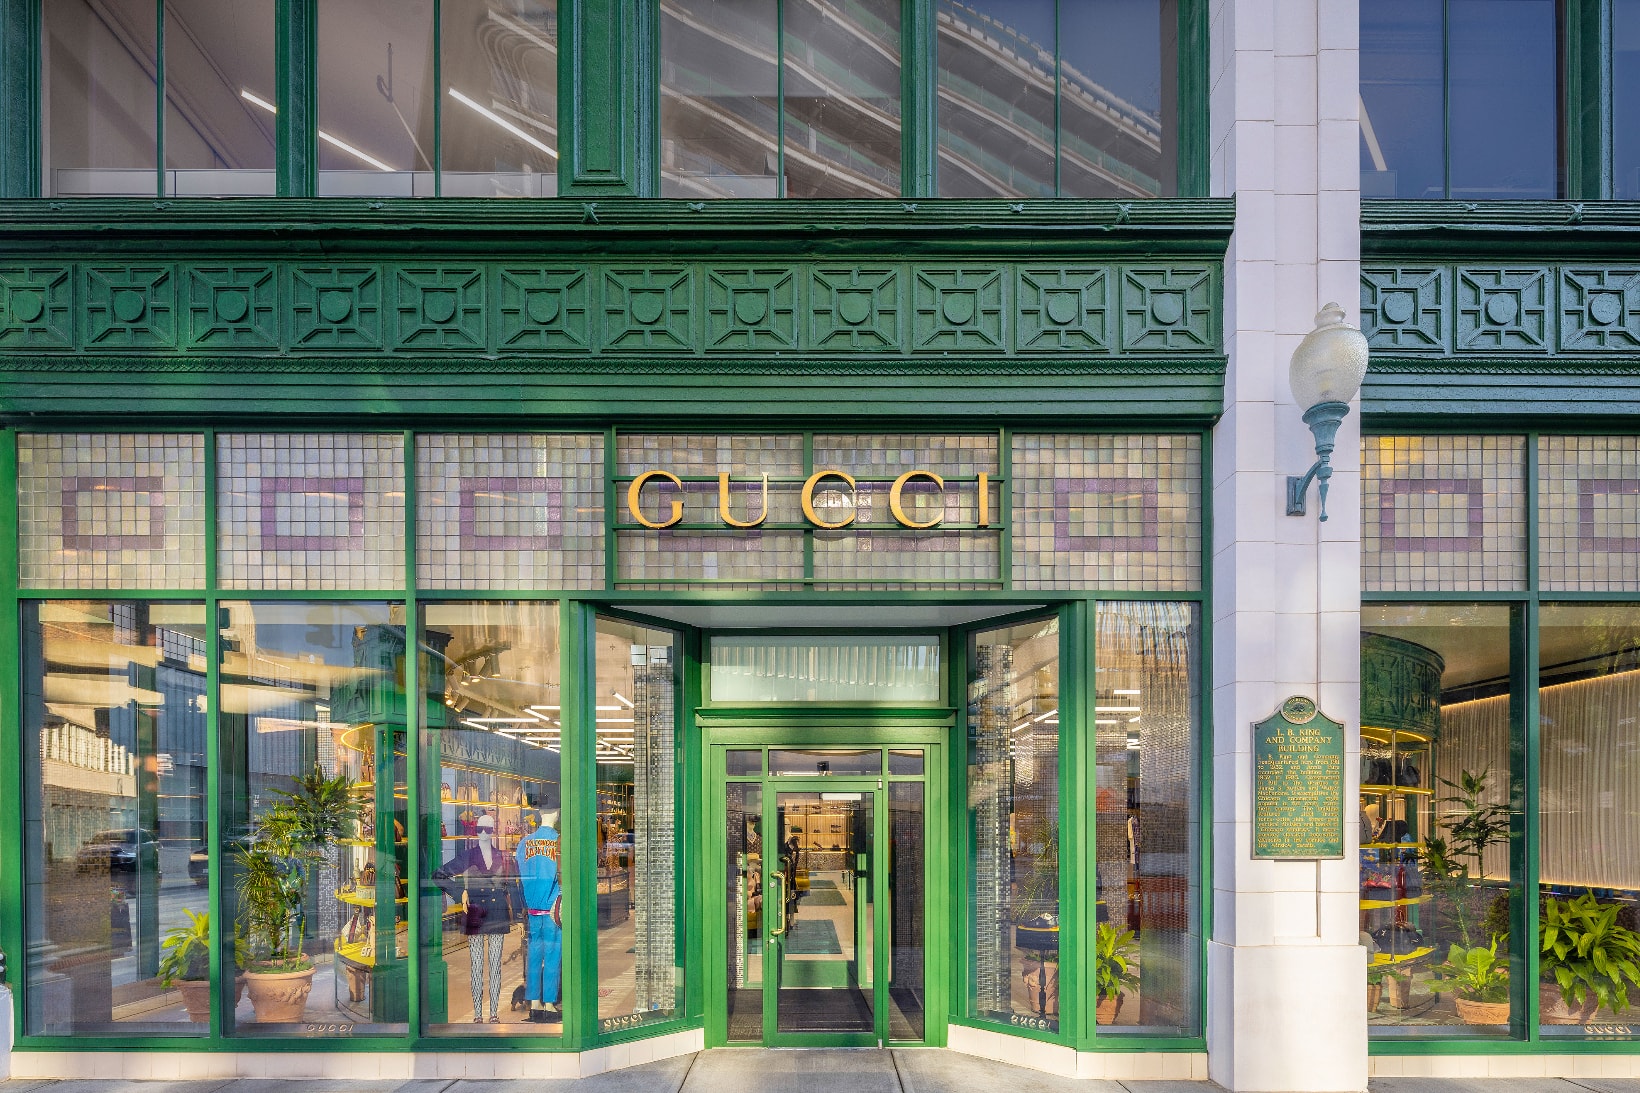 Gucci's First New York Store Was Opened in 1953